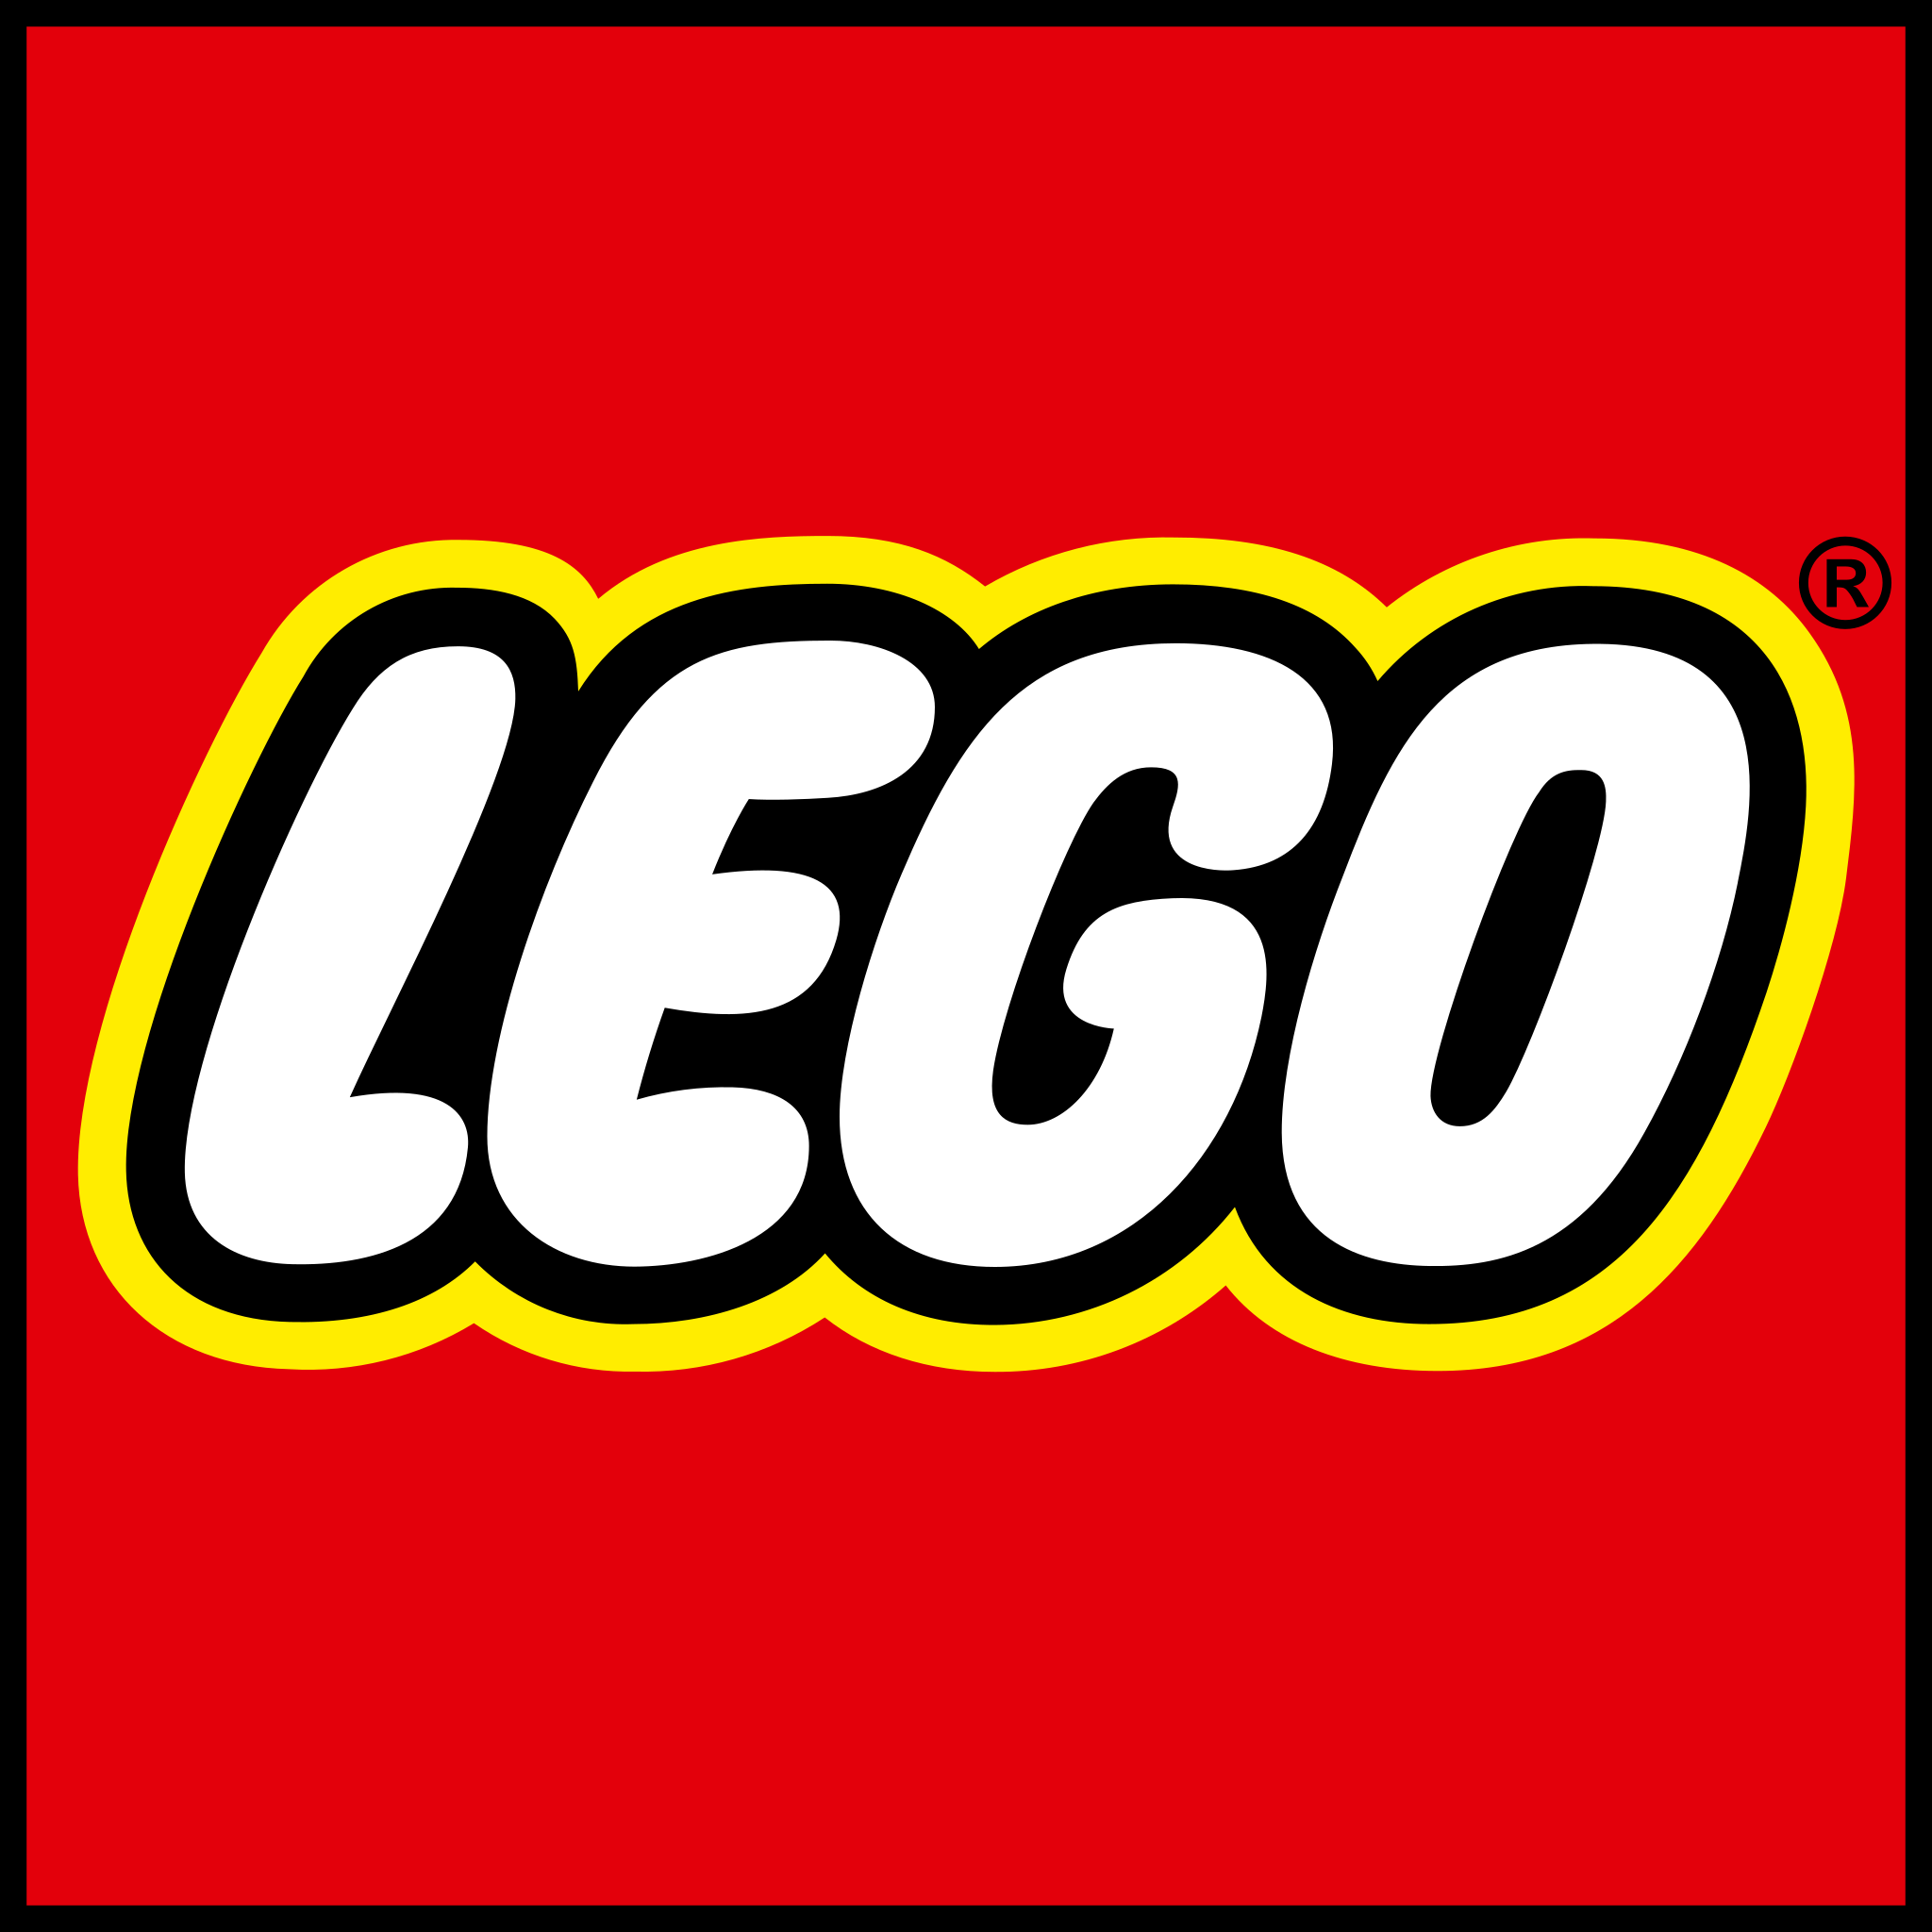 2X VIP Points available February 10th through 16th For LEGO VIPS